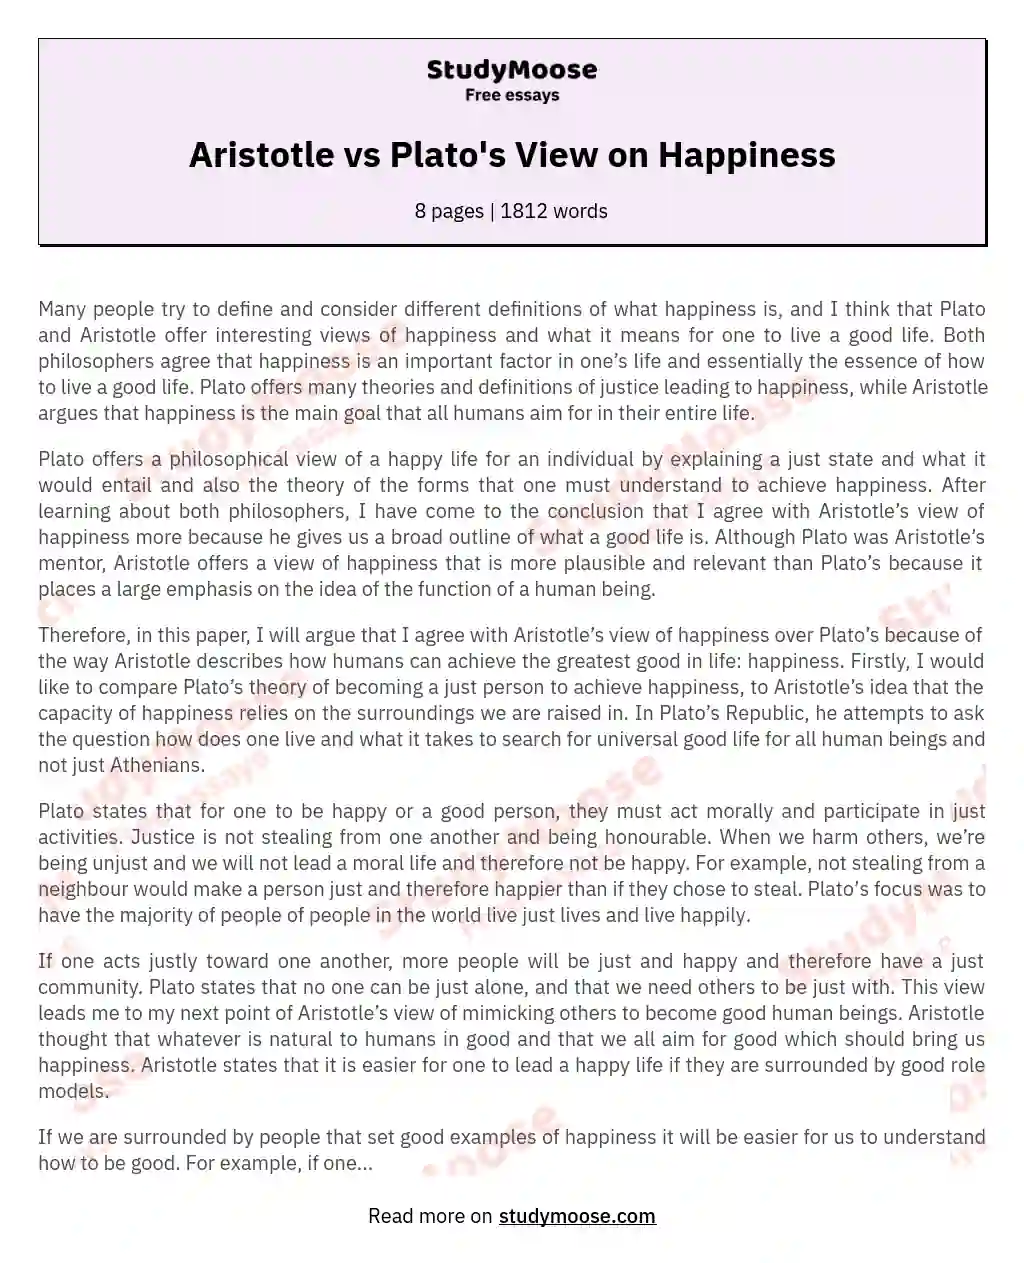 Comparison of Aristotle's and Plato's Perspectives on Happiness essay